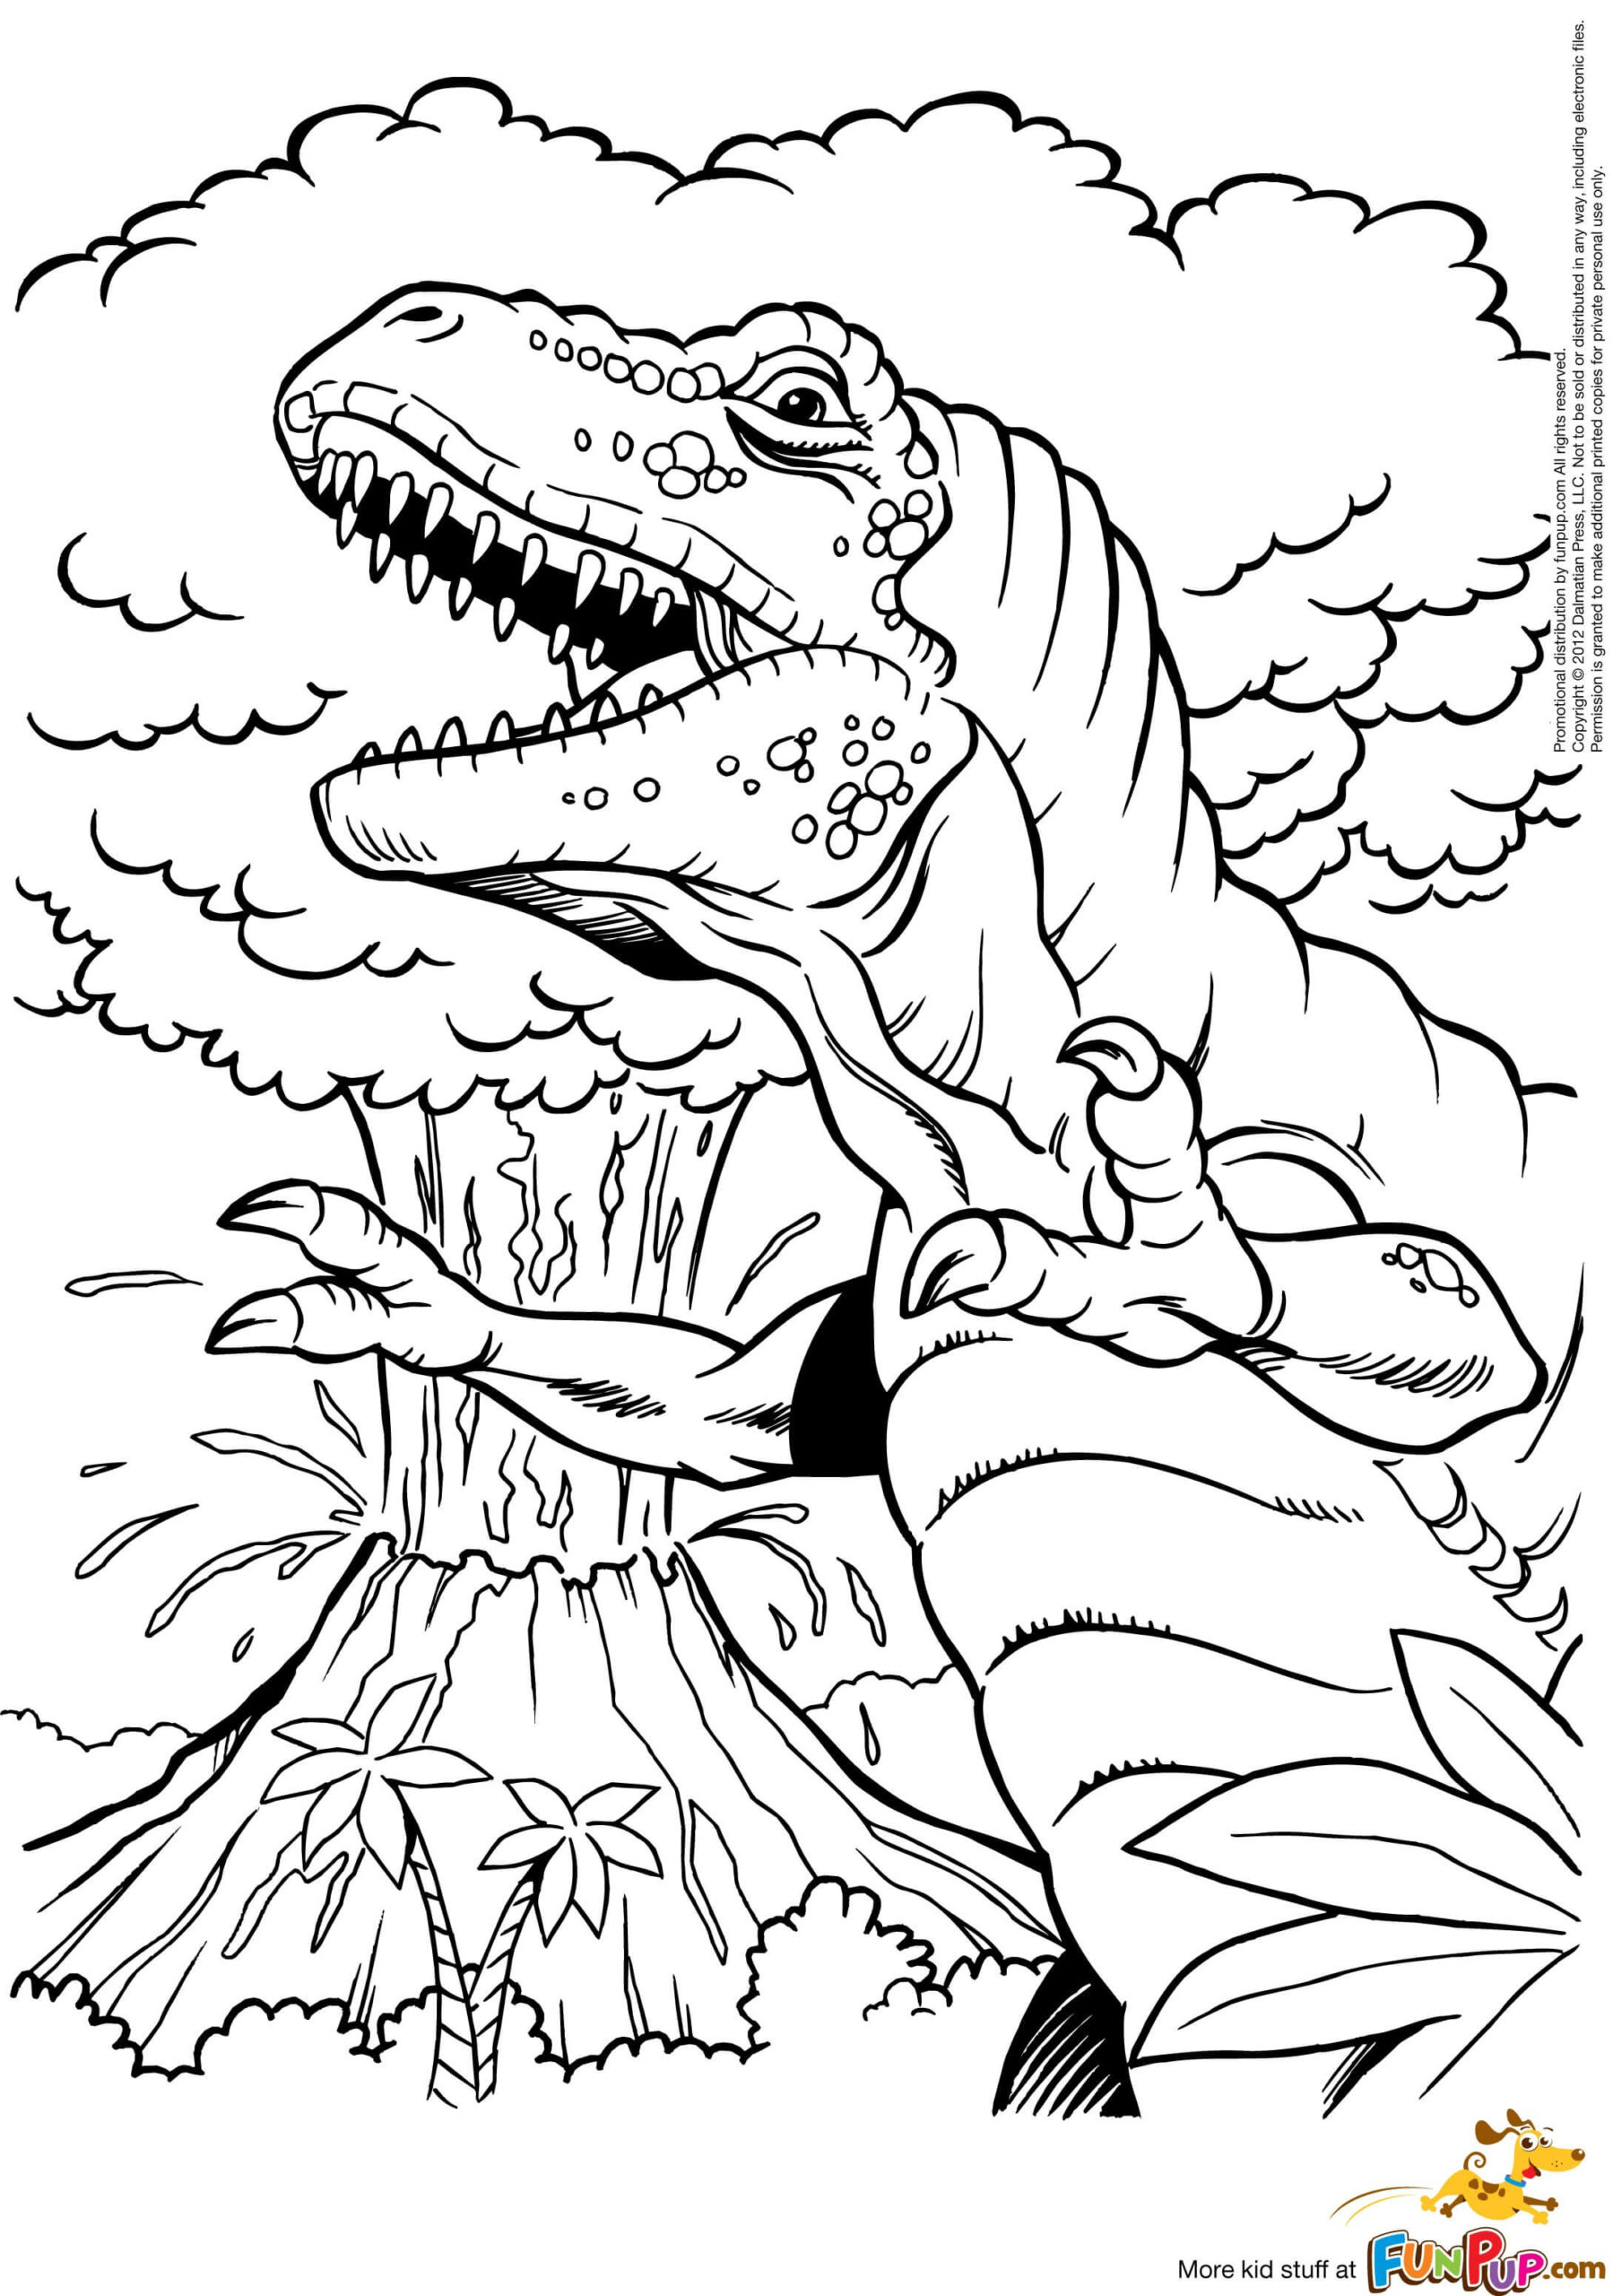 big t rex coloring page | baby t rex coloring page | toy story rex coloring page